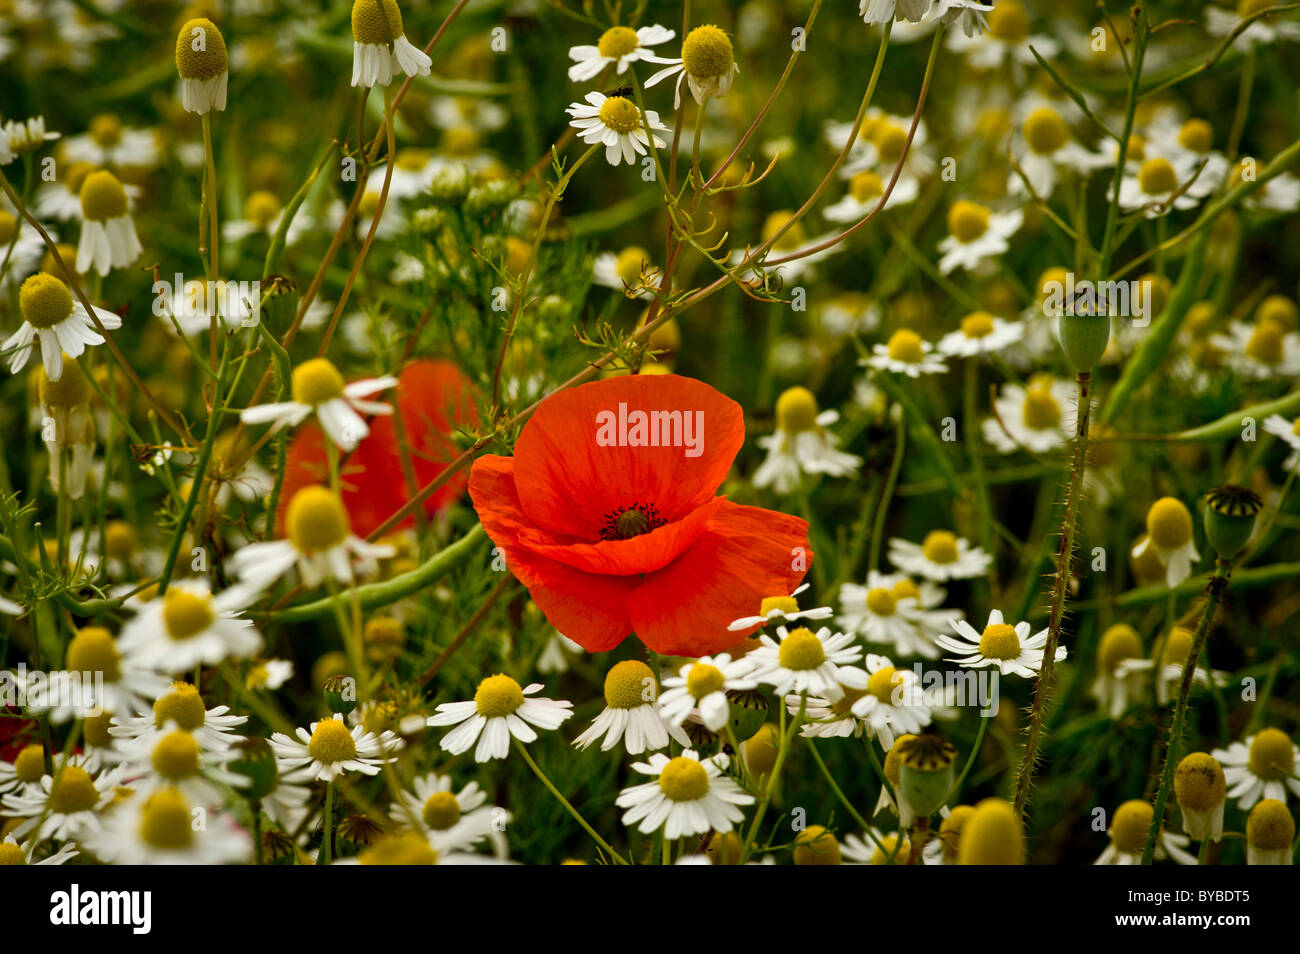 Red common poppies growing amongst white Oxeye daisies in a wild flower meadow Stock Photo